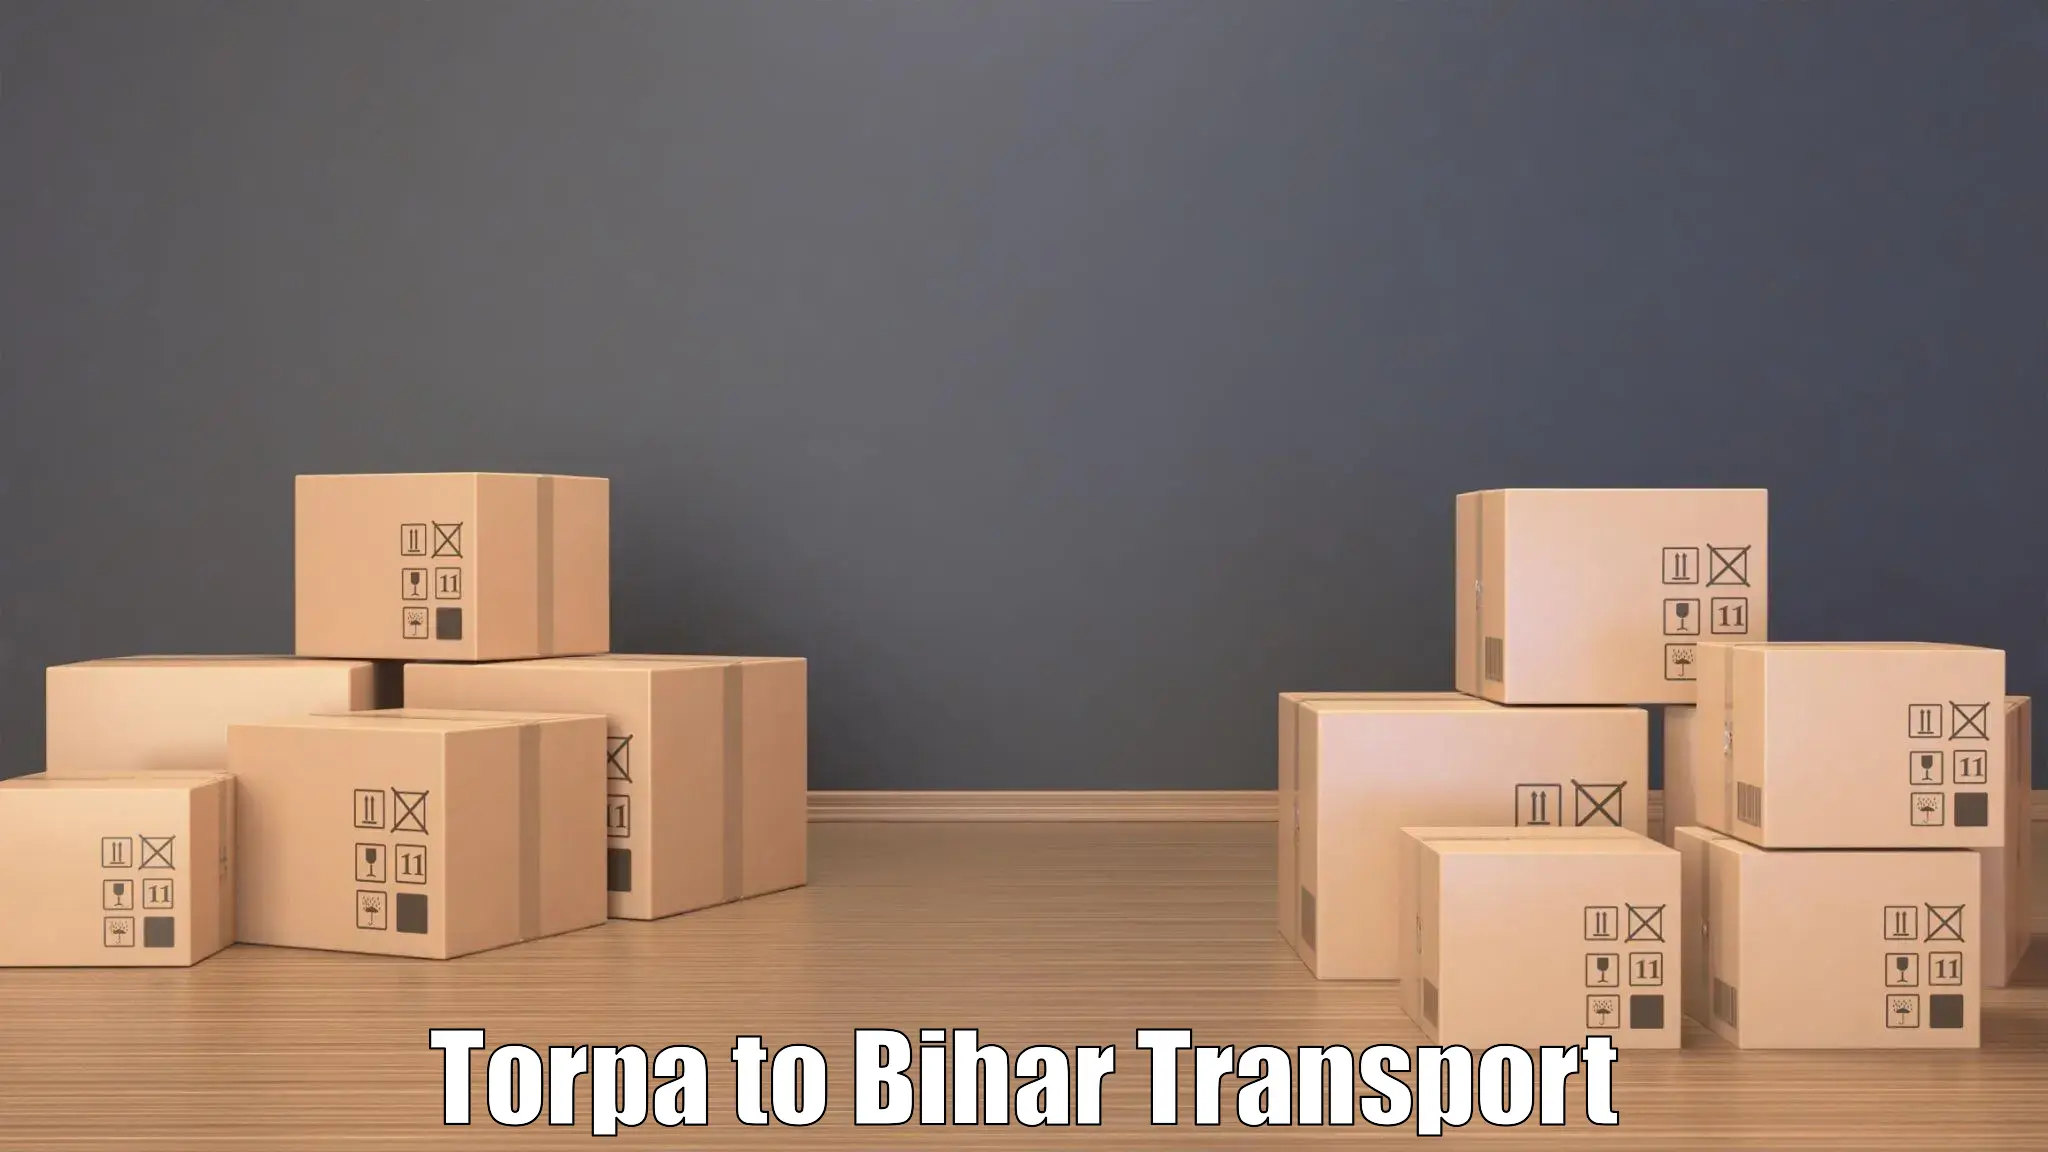 Truck transport companies in India in Torpa to Nawada